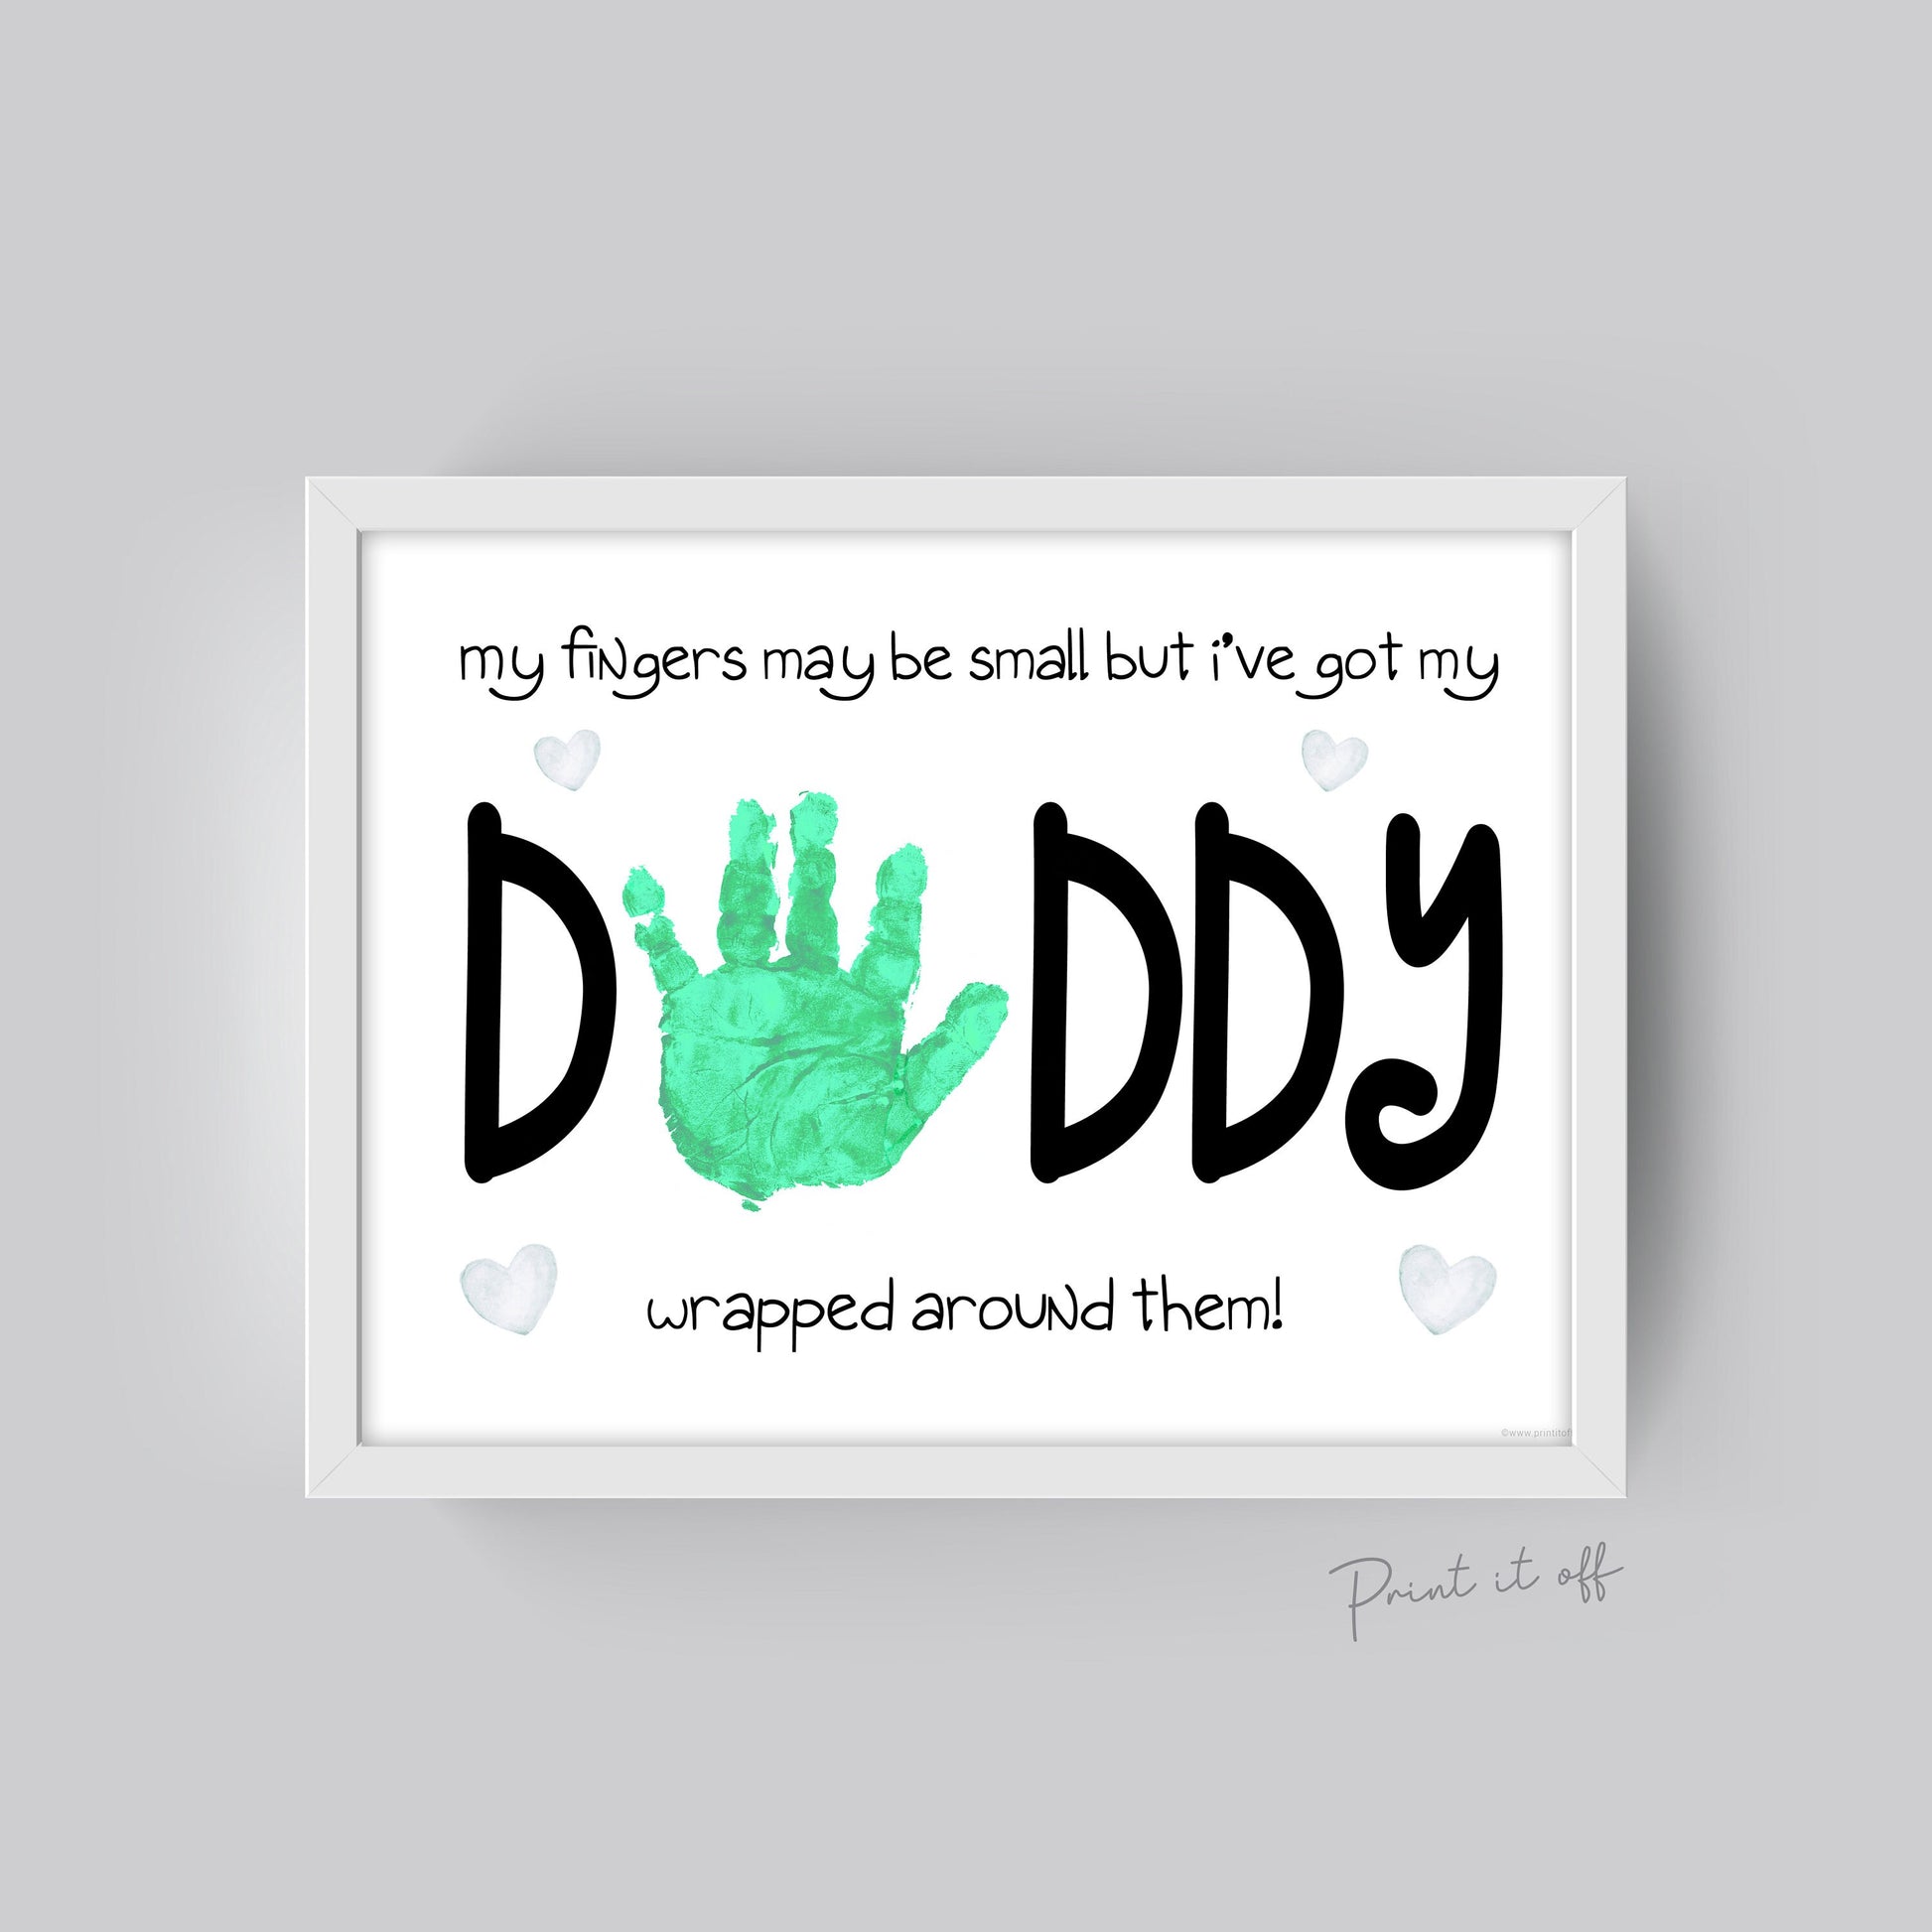 Handprint Art Craft / Daddy Dad / Small Fingers Wrapped Around / Father's Day Birthday / Baby Toddler / DIY Card Memory / Print it off 0488